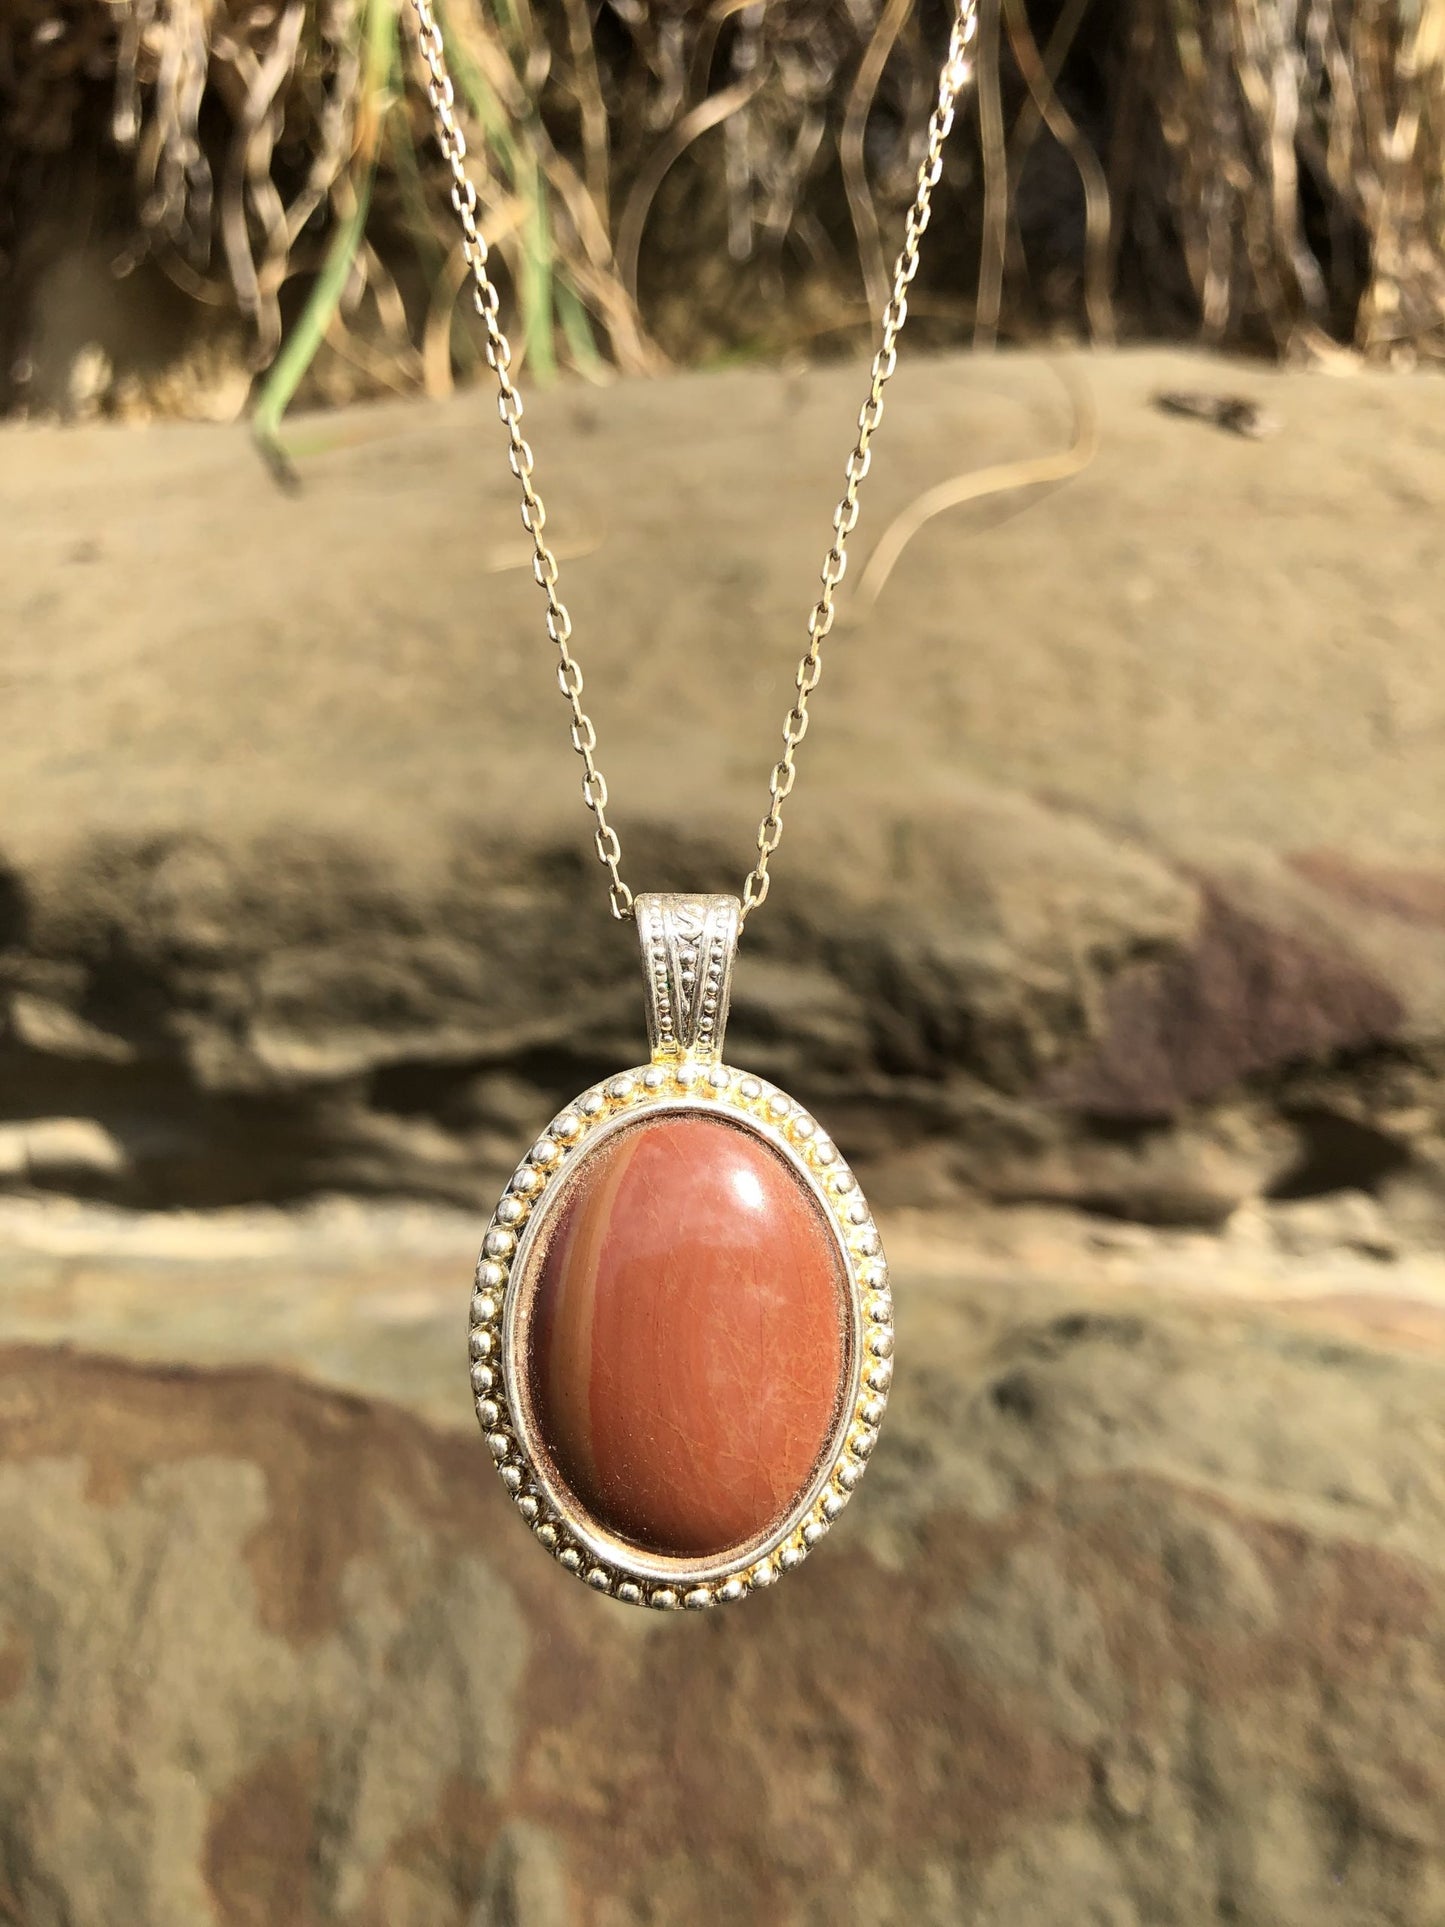 Necklace of Petrified Wood, turned to Jasper, with red and orange hues, from Coromandel, New Zealand, hand polished to a 30x22mm cabochon and set in a silver plated setting with 19 inch chain, front